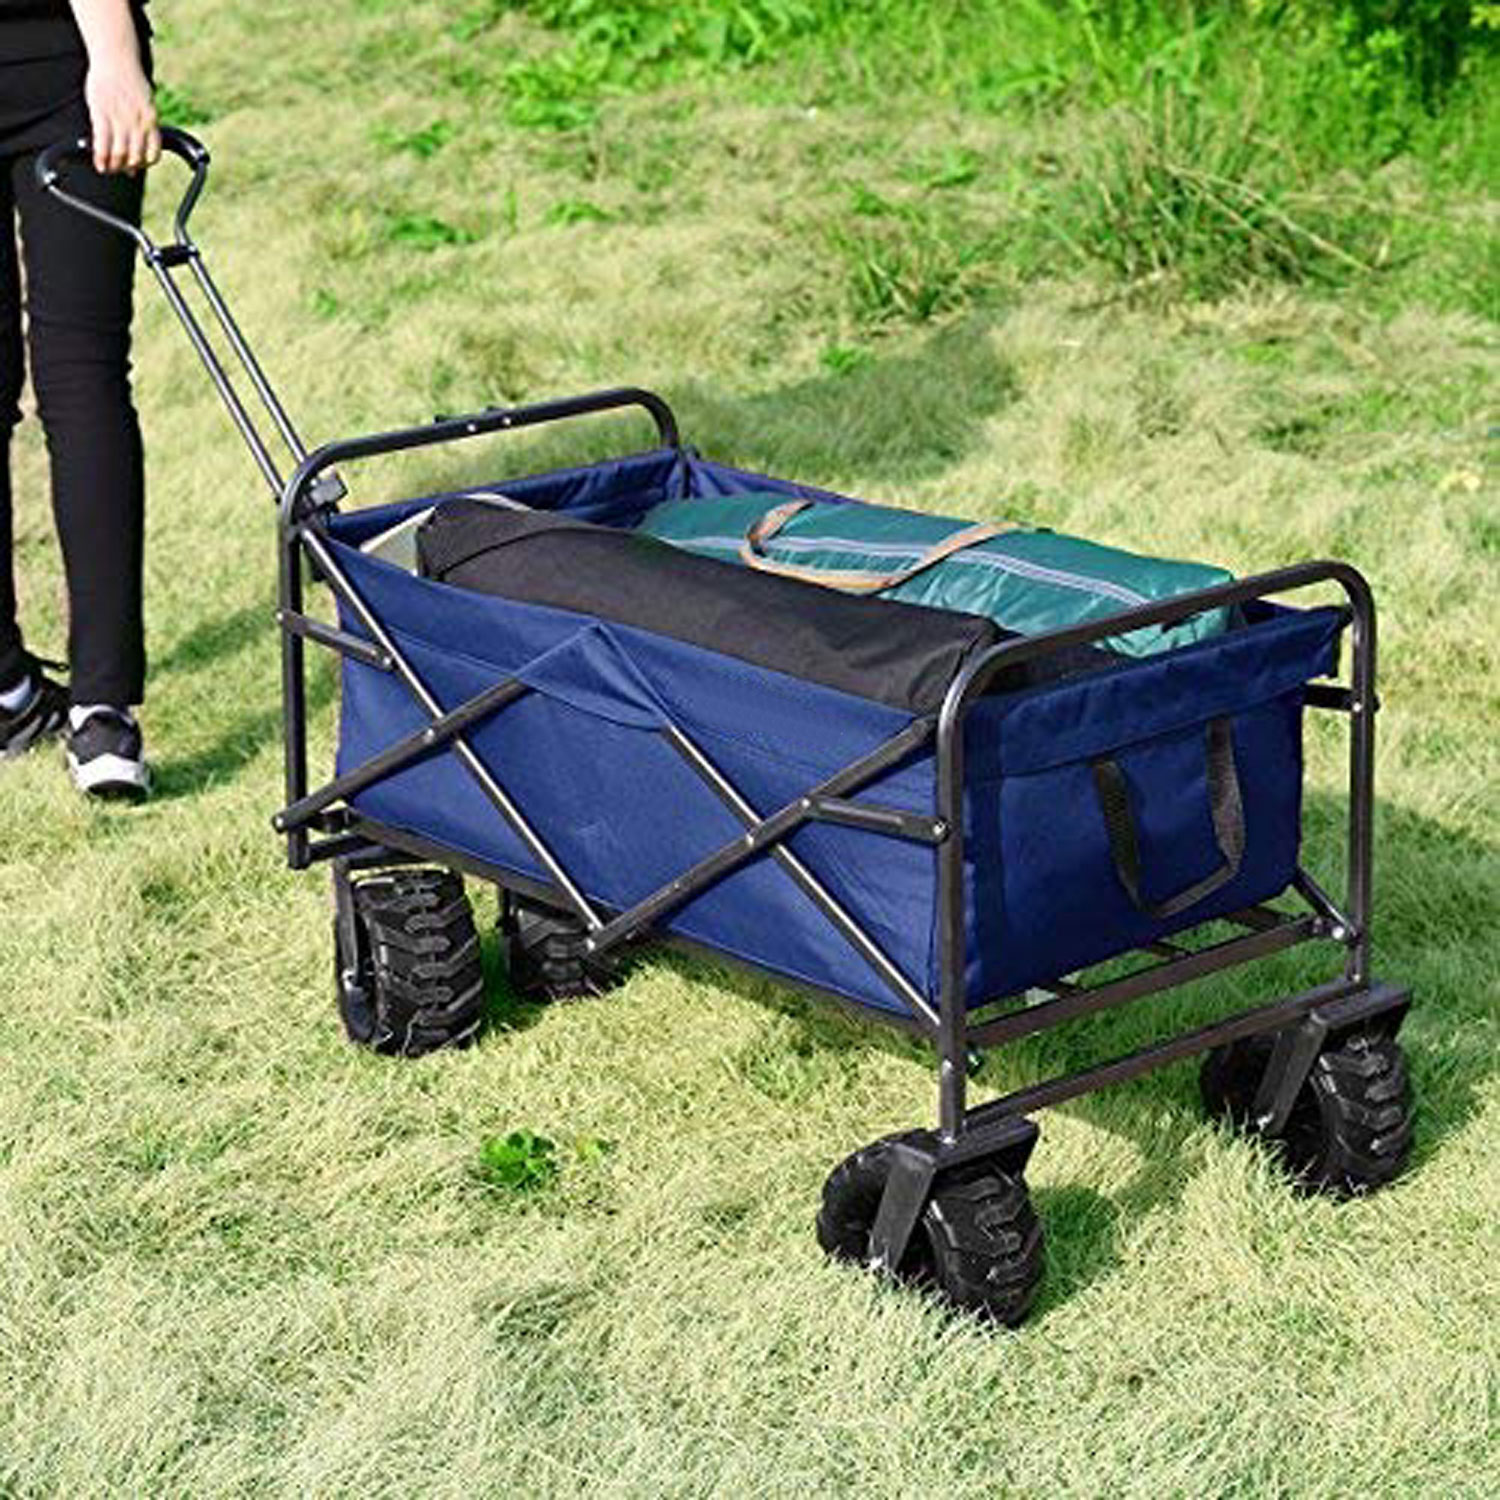 All Terrain Heavy Duty Grocery Cart Utility Collapsible Wagon for Outdoor Garden Picnic Beach Sports Camping Neutral Push and Pull Beach Wagon with Big Wide Rubber Wheels 